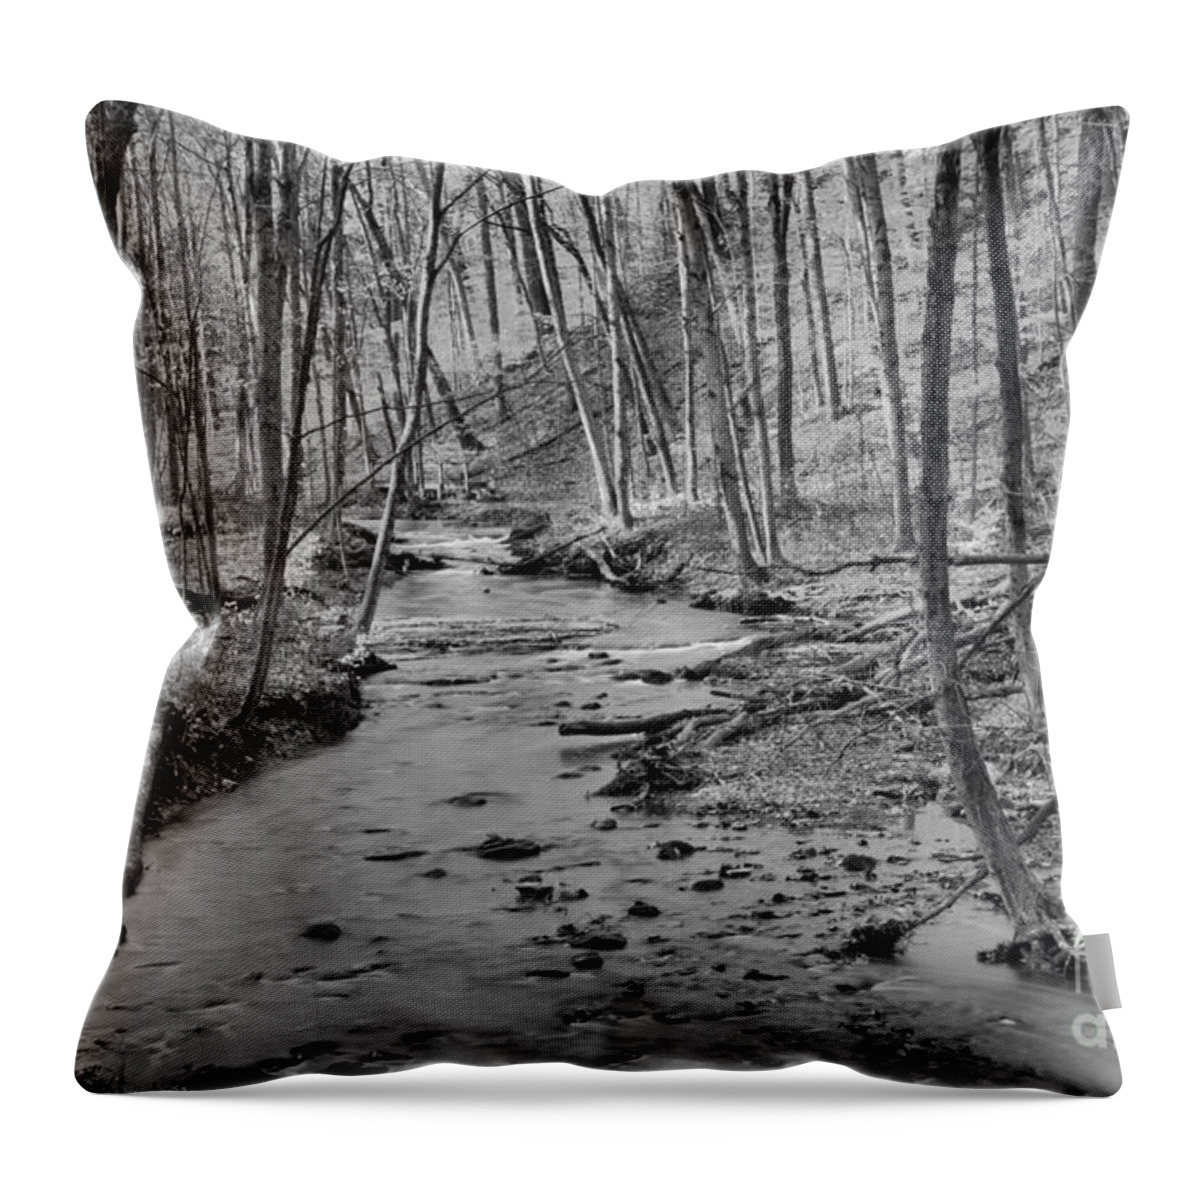 Hells Hollow Throw Pillow featuring the photograph Hells Hollow Fall Foliage Black And White by Adam Jewell